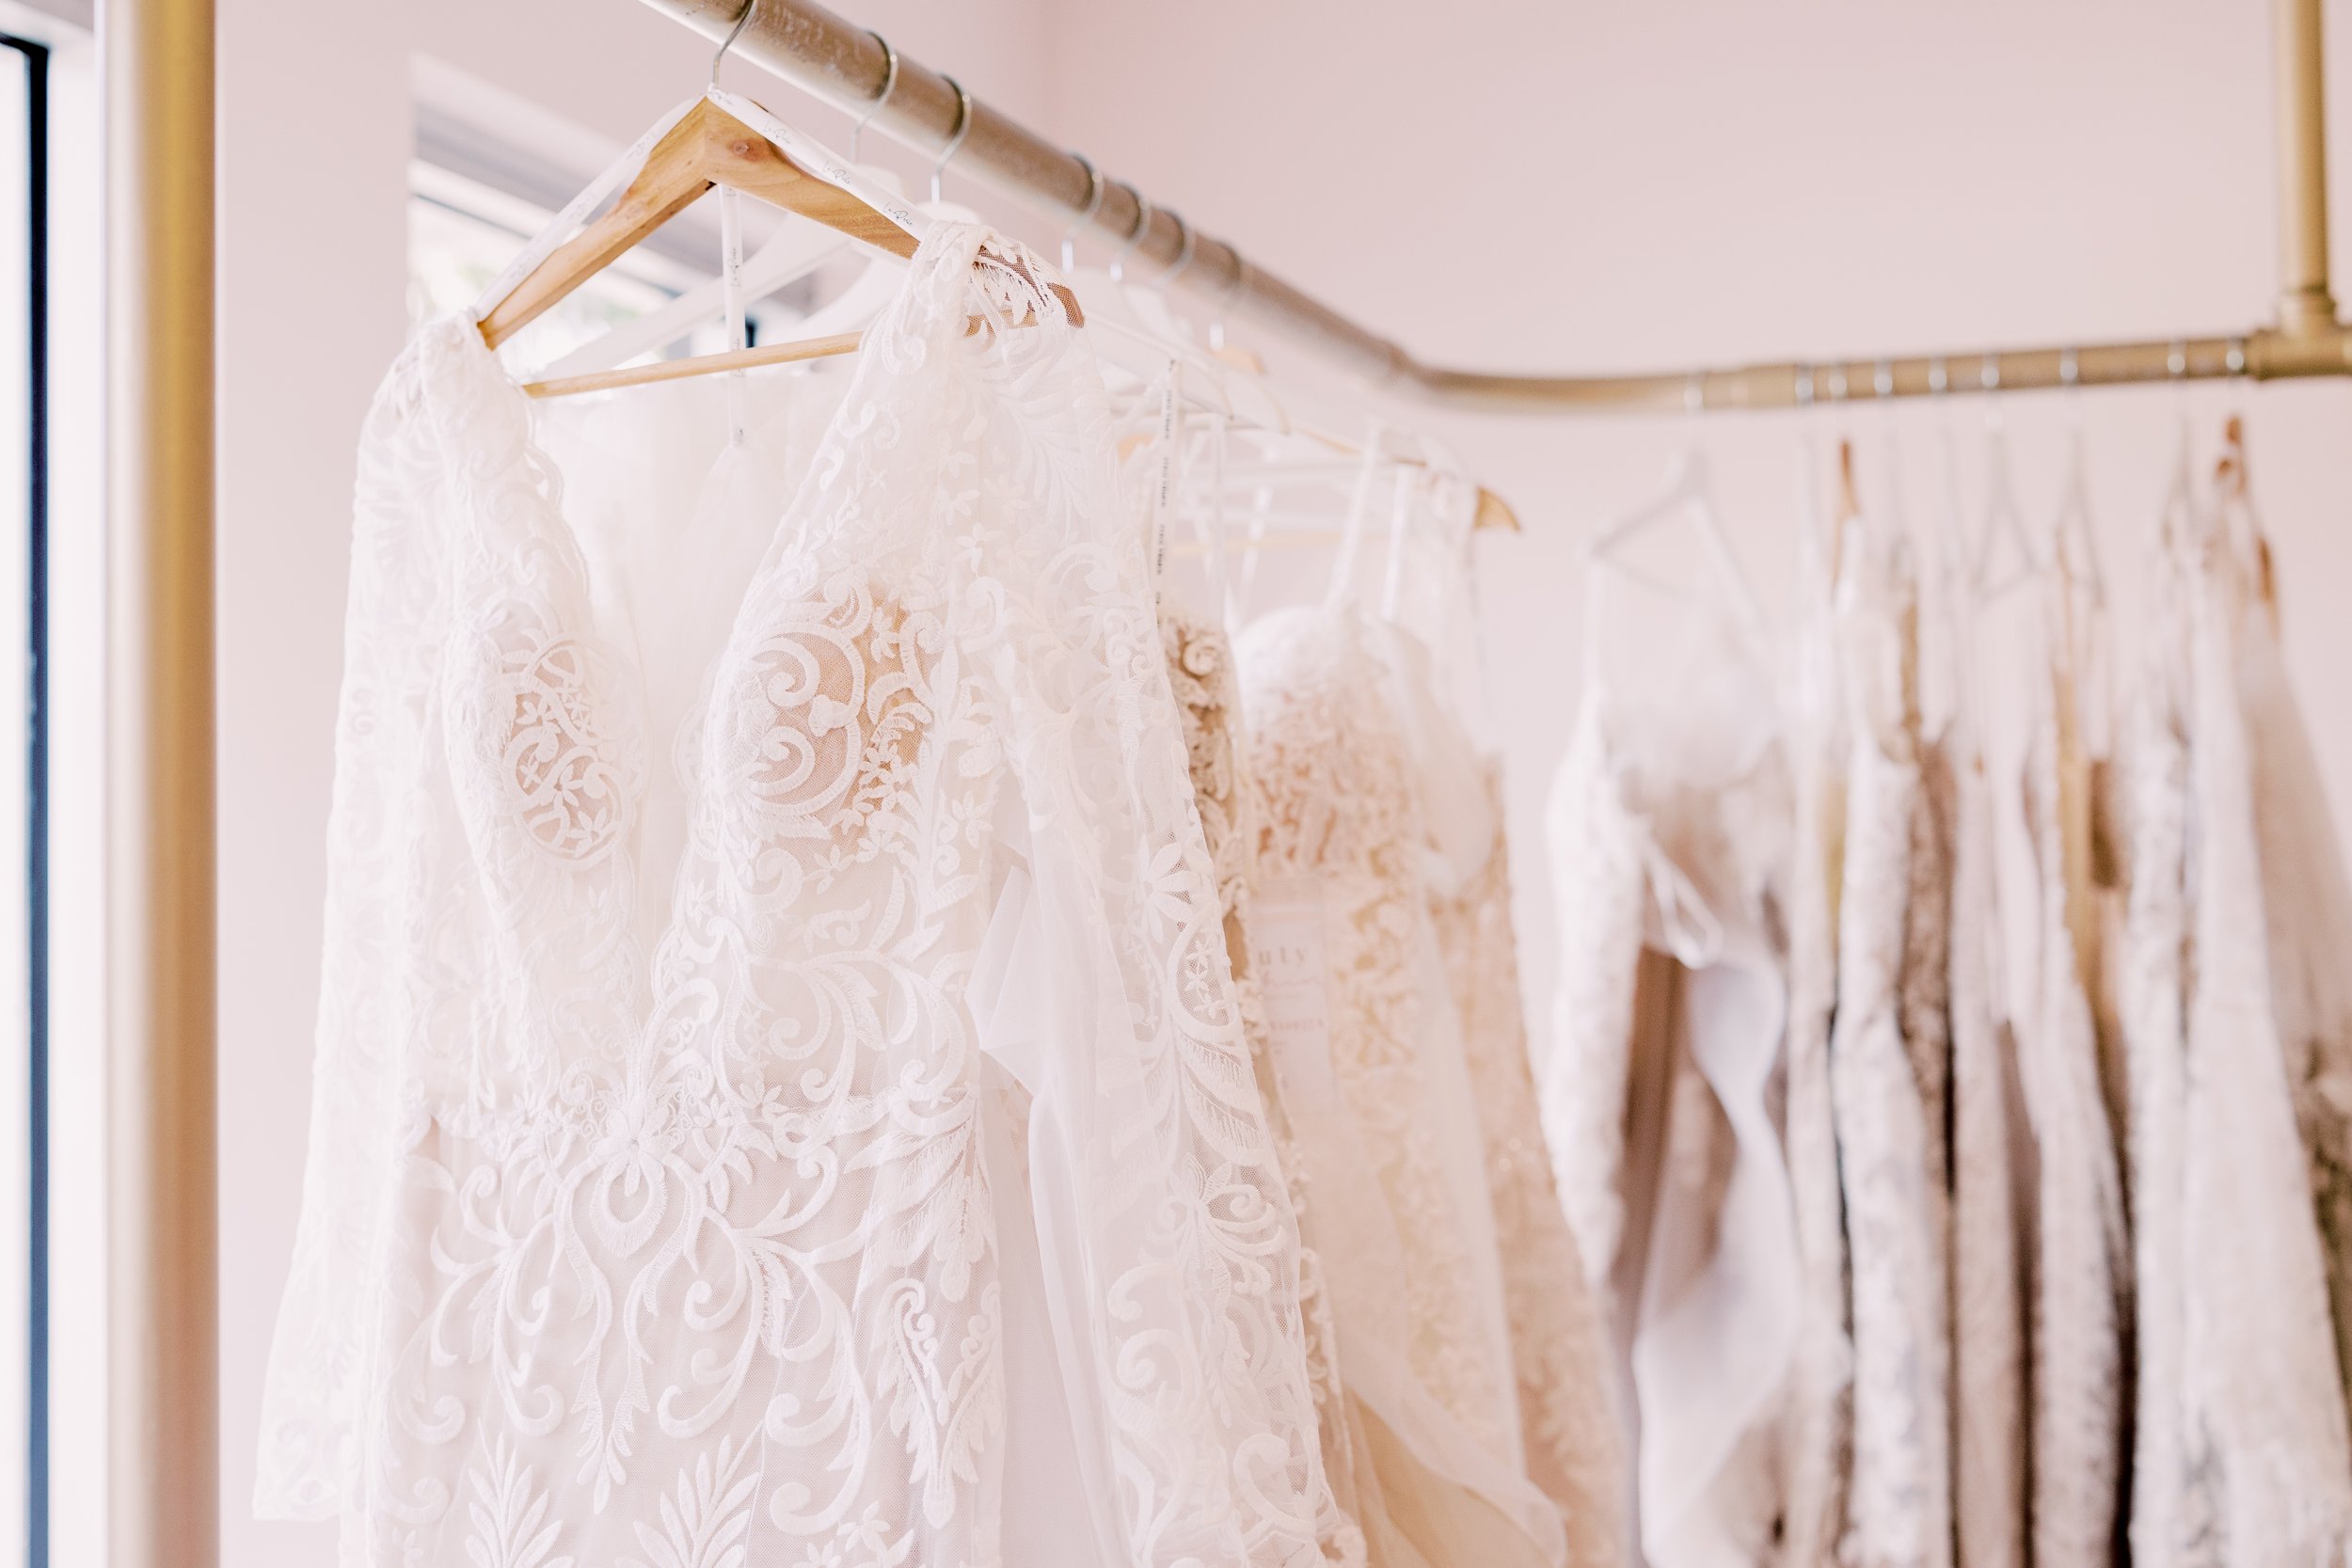 Beauty Within | A Bridal Boutique